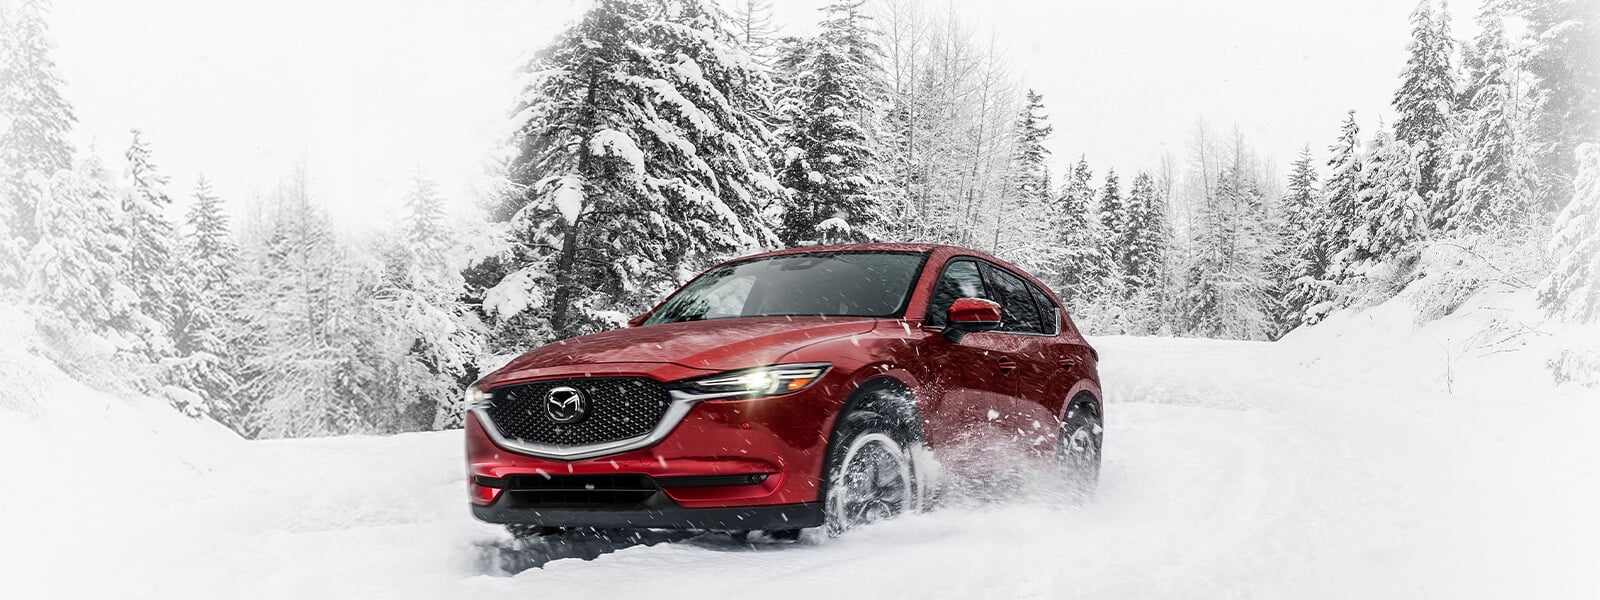 Soul Red Crystal Mazda SUV with headlights on drives past snow-covered conifers as it negotiates a curve in deep snow on a rural road.